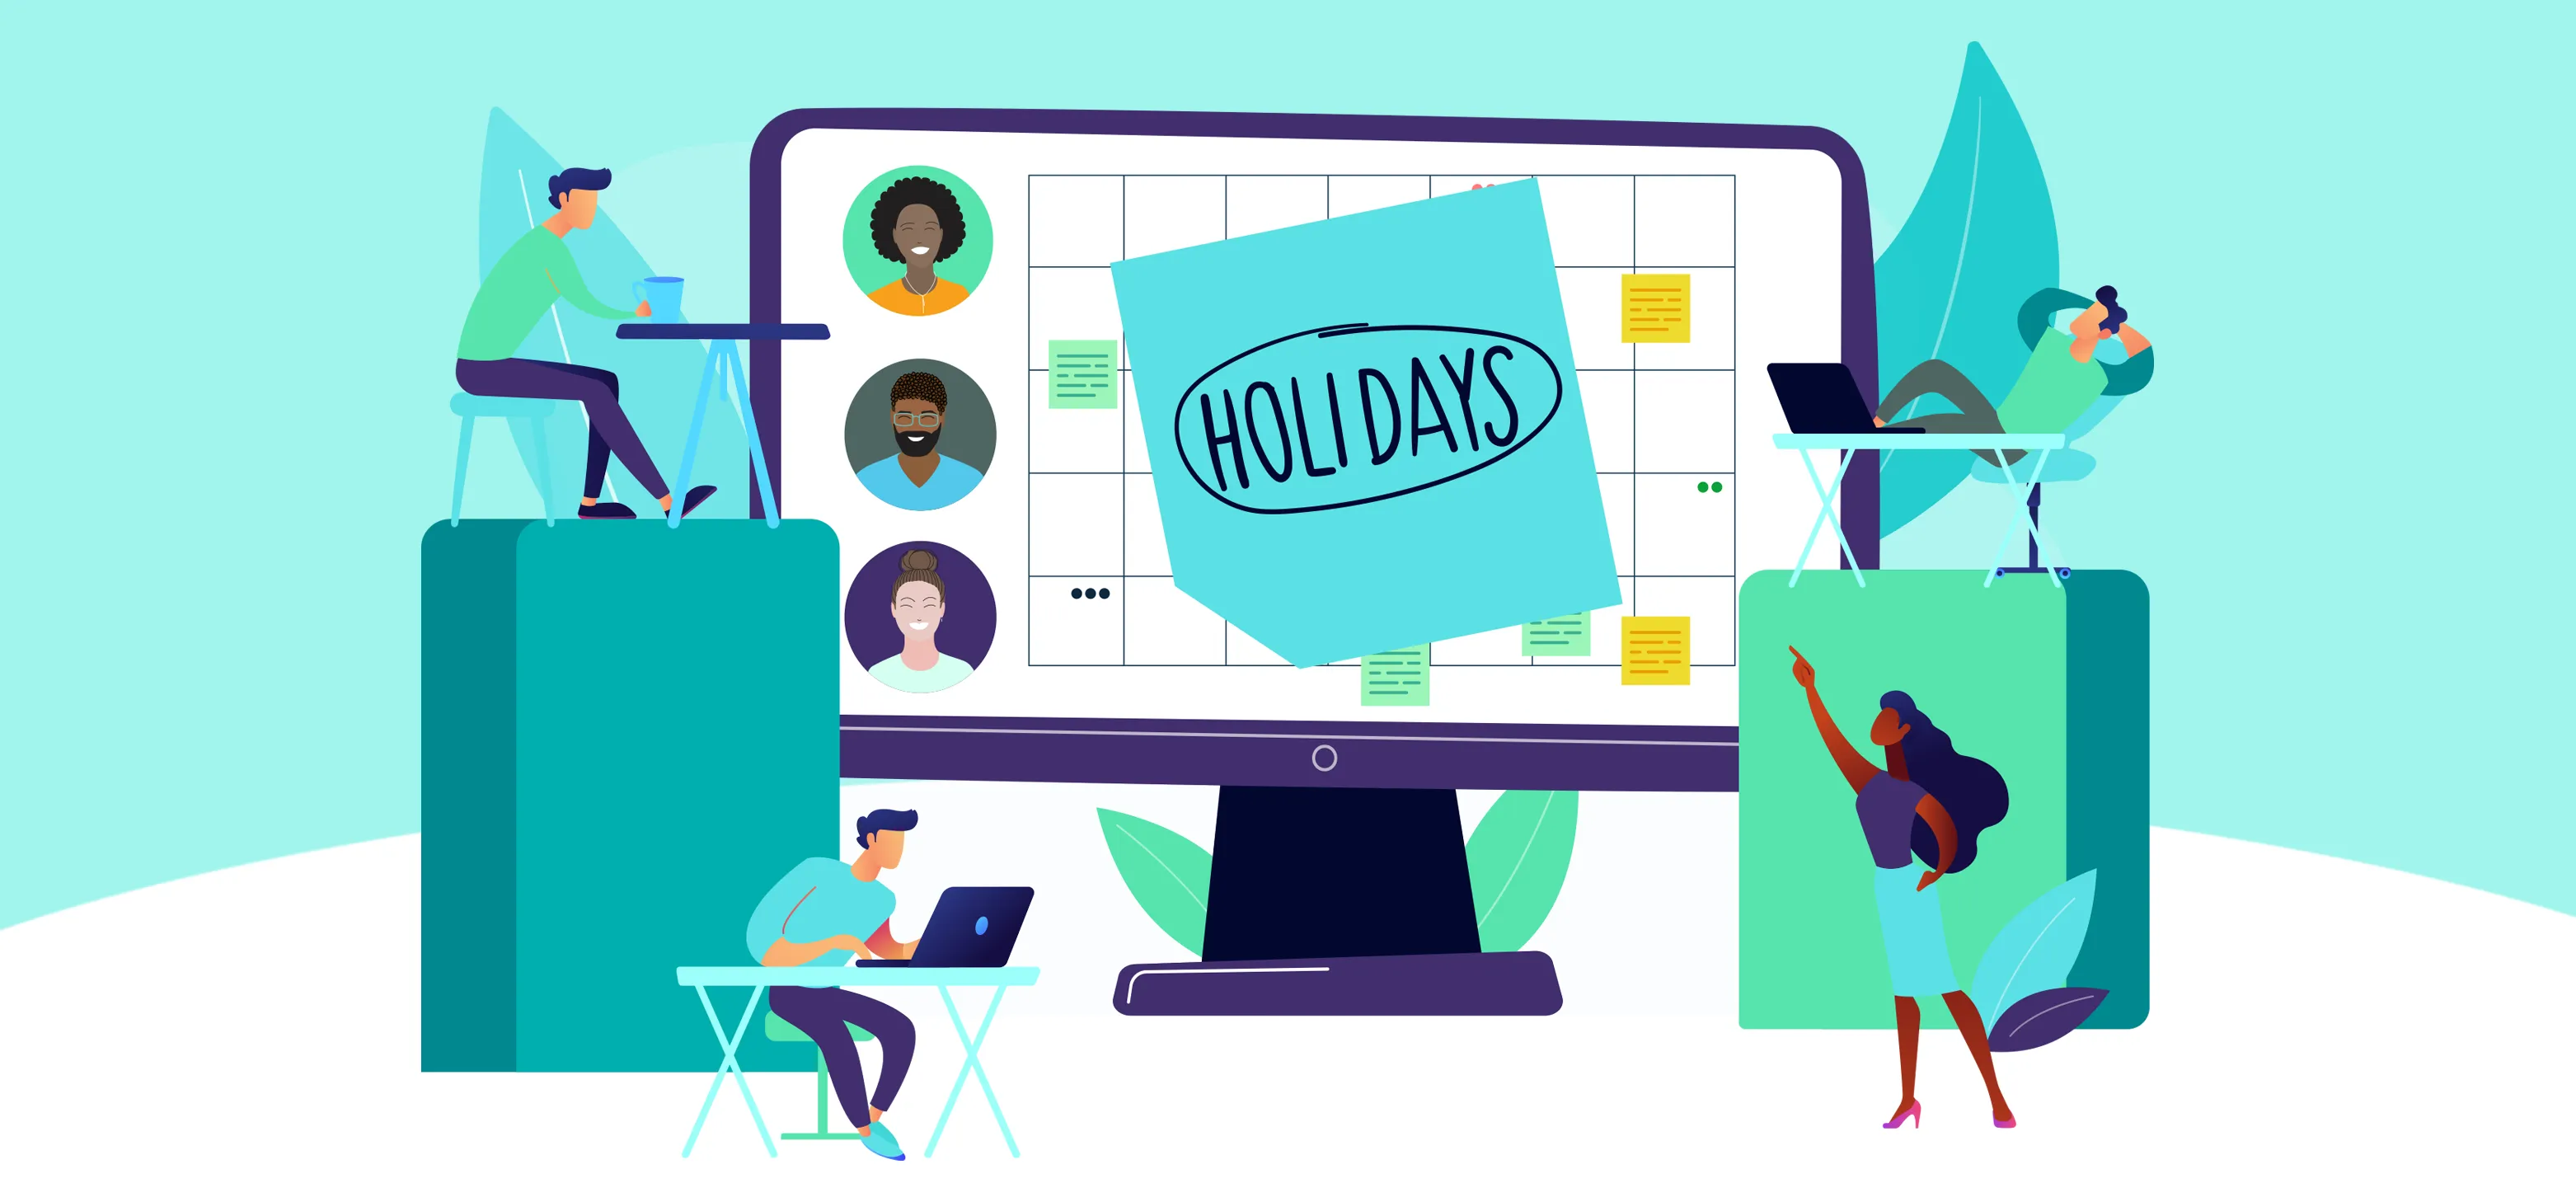 Staff holiday management software